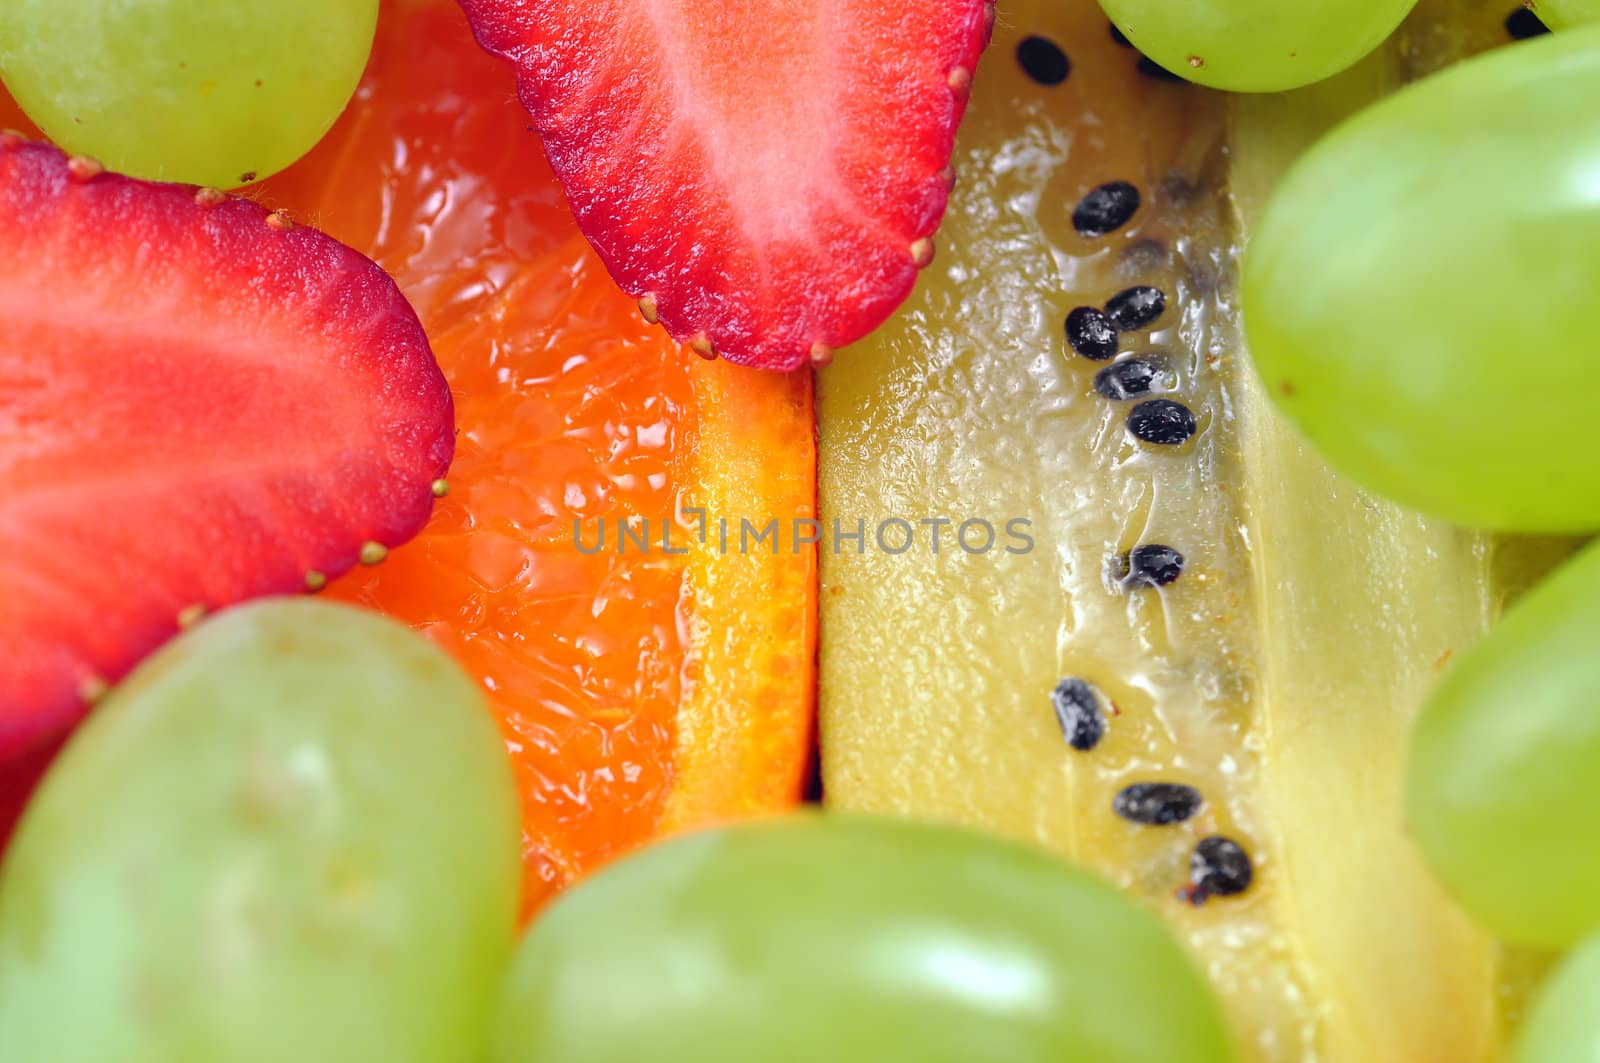 Delicious fruit salad by Mirage3